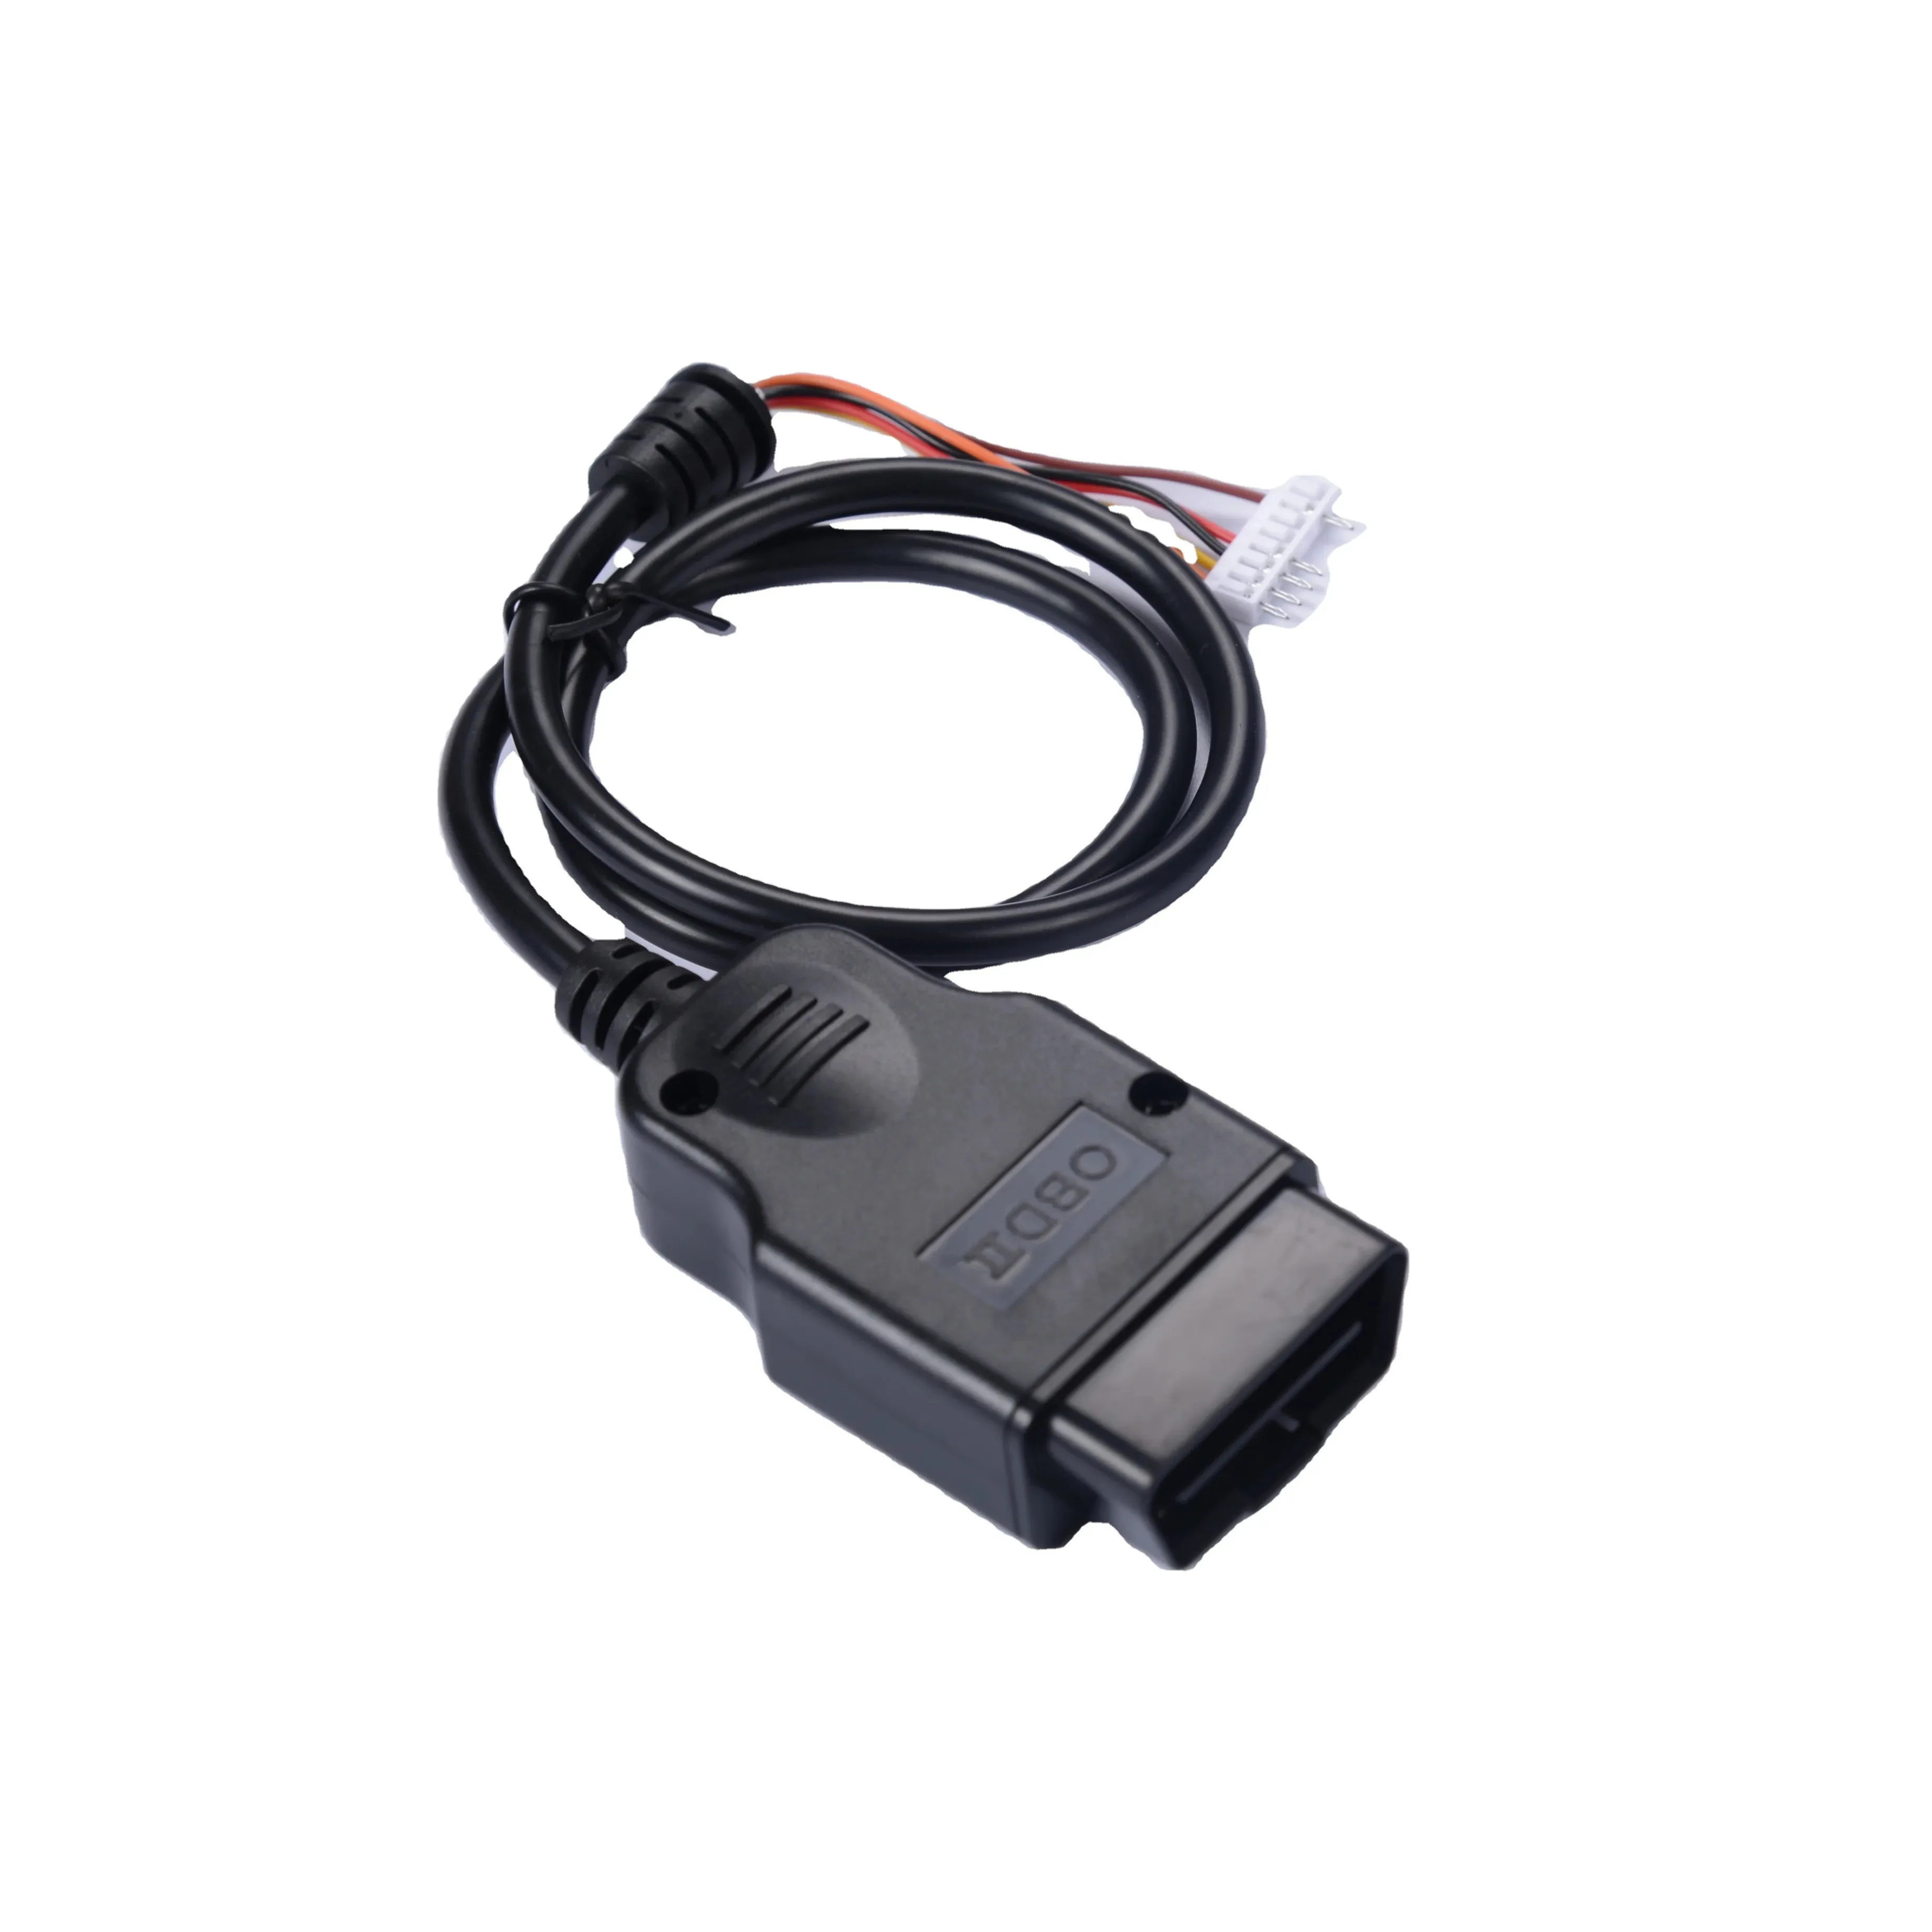 Customized OBD2 male connector cable for automotive diagnostic connection equipment cable